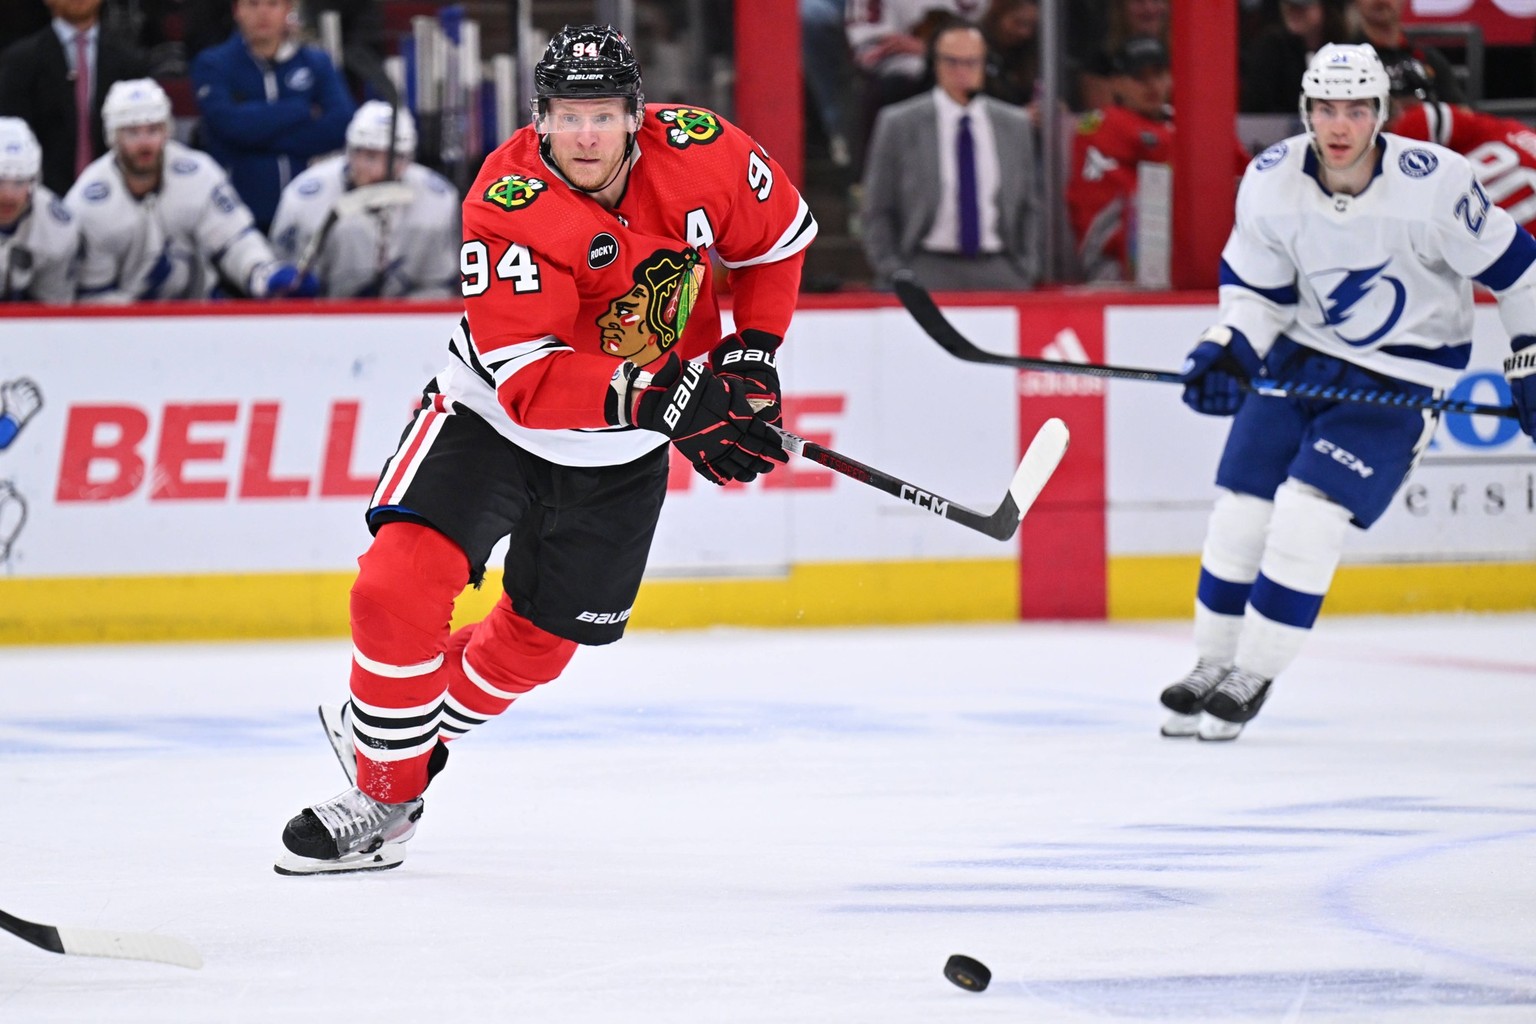 NHL, Eishockey Herren, USA Tampa Bay Lightning at Chicago Blackhawks Nov 16, 2023 Chicago, Illinois, USA Chicago Blackhawks forward Corey Perry 94 chases after a loose puck in the third period against ...